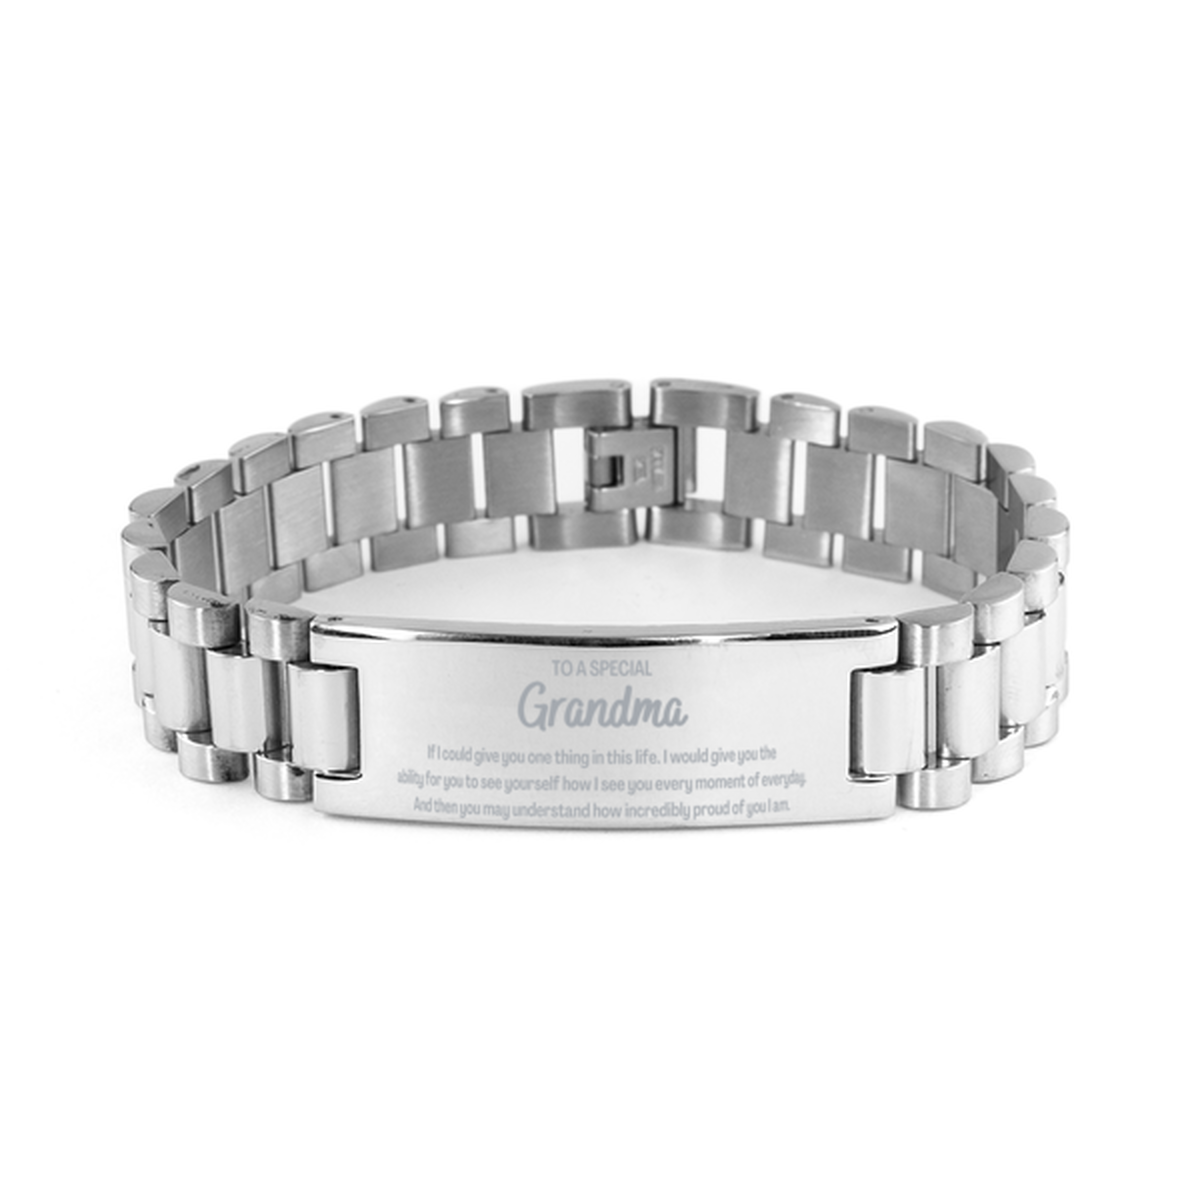 To My Grandma Ladder Stainless Steel Bracelet, Gifts For Grandma Engraved, Inspirational Gifts for Christmas Birthday, Epic Gifts for Grandma To A Special Grandma how incredibly proud of you I am